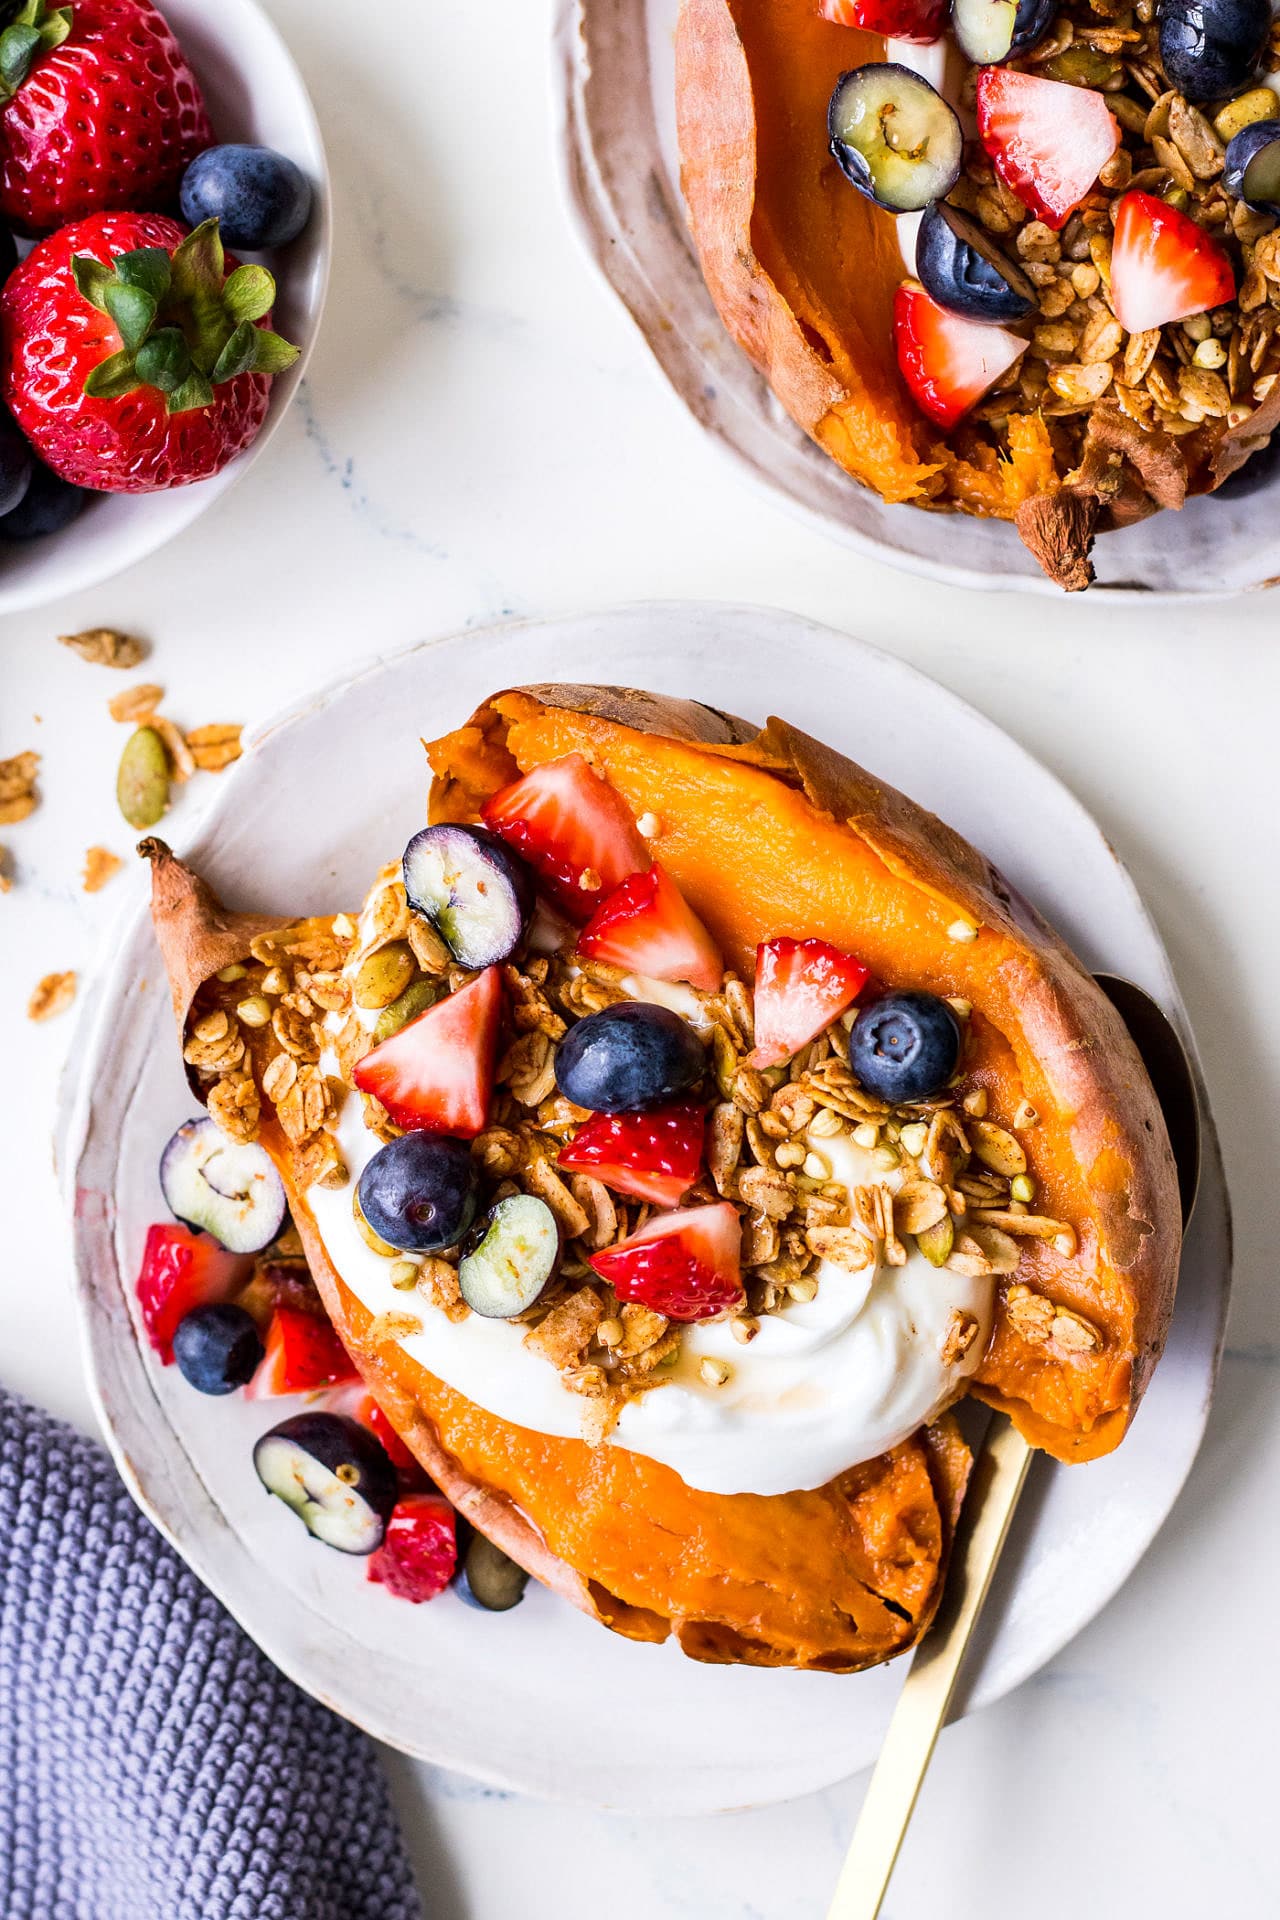 Small white plate with open sweet potato topped with yoghurt, strawberries, blueberries and oat granola, gold spoon to side